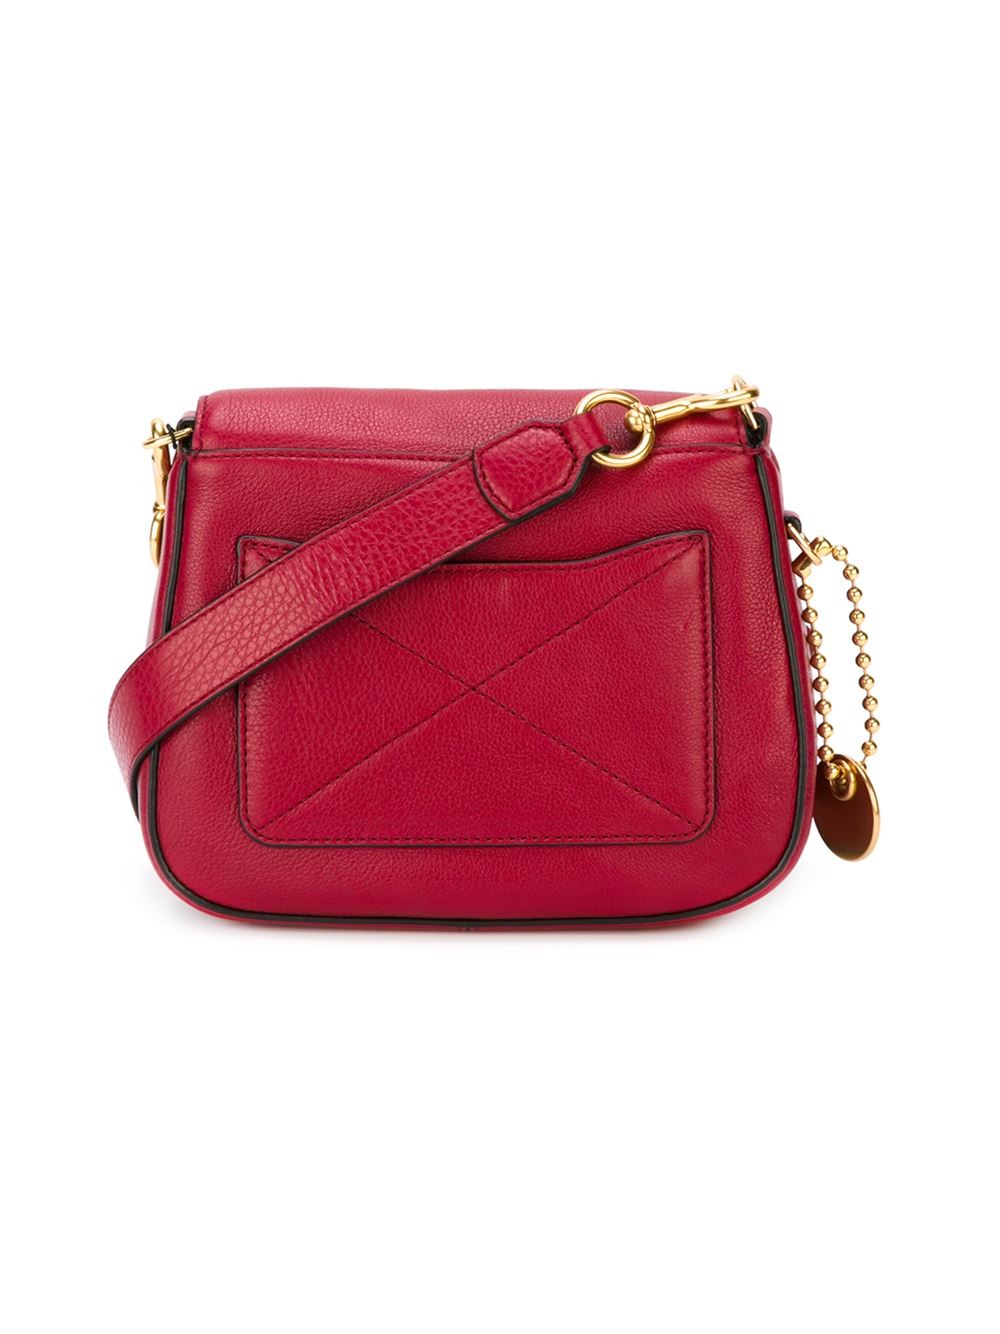 Marc Jacobs Leather Recruit Small Crossbody Bag in Red - Lyst